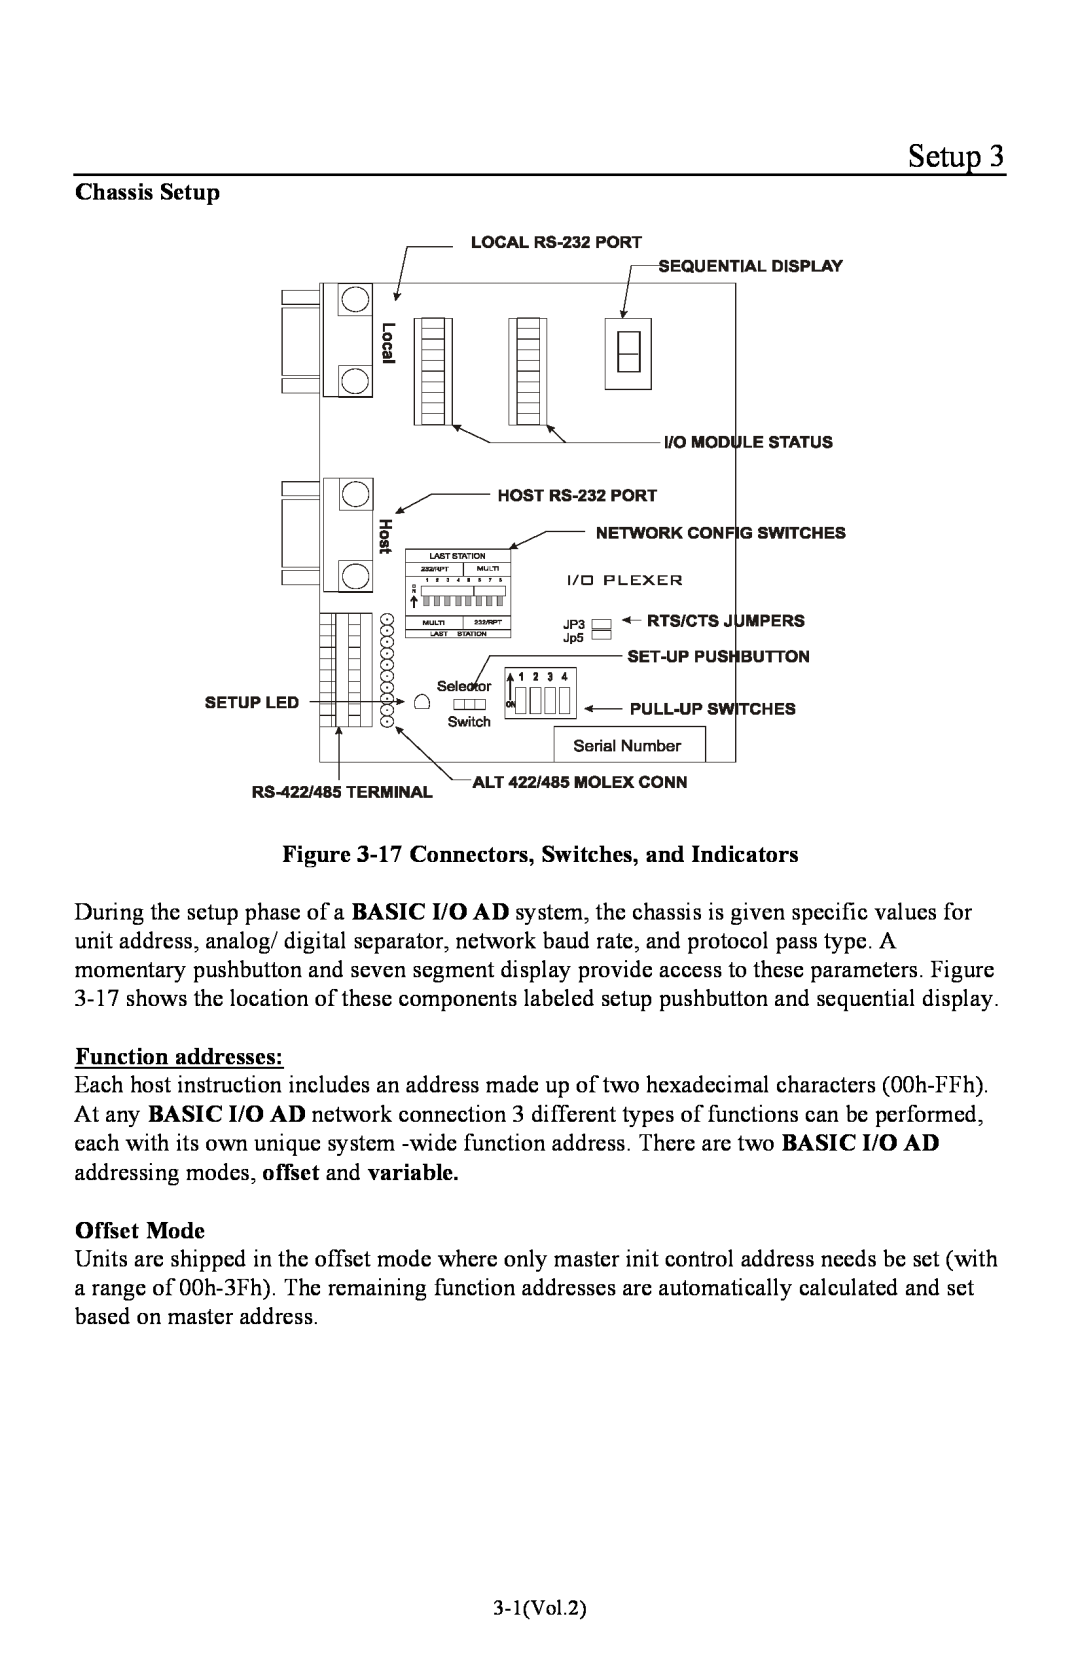 I-O Display Systems Basic I/O Product manual Chassis Setup -17 Connectors, Switches, and Indicators, Function addresses 